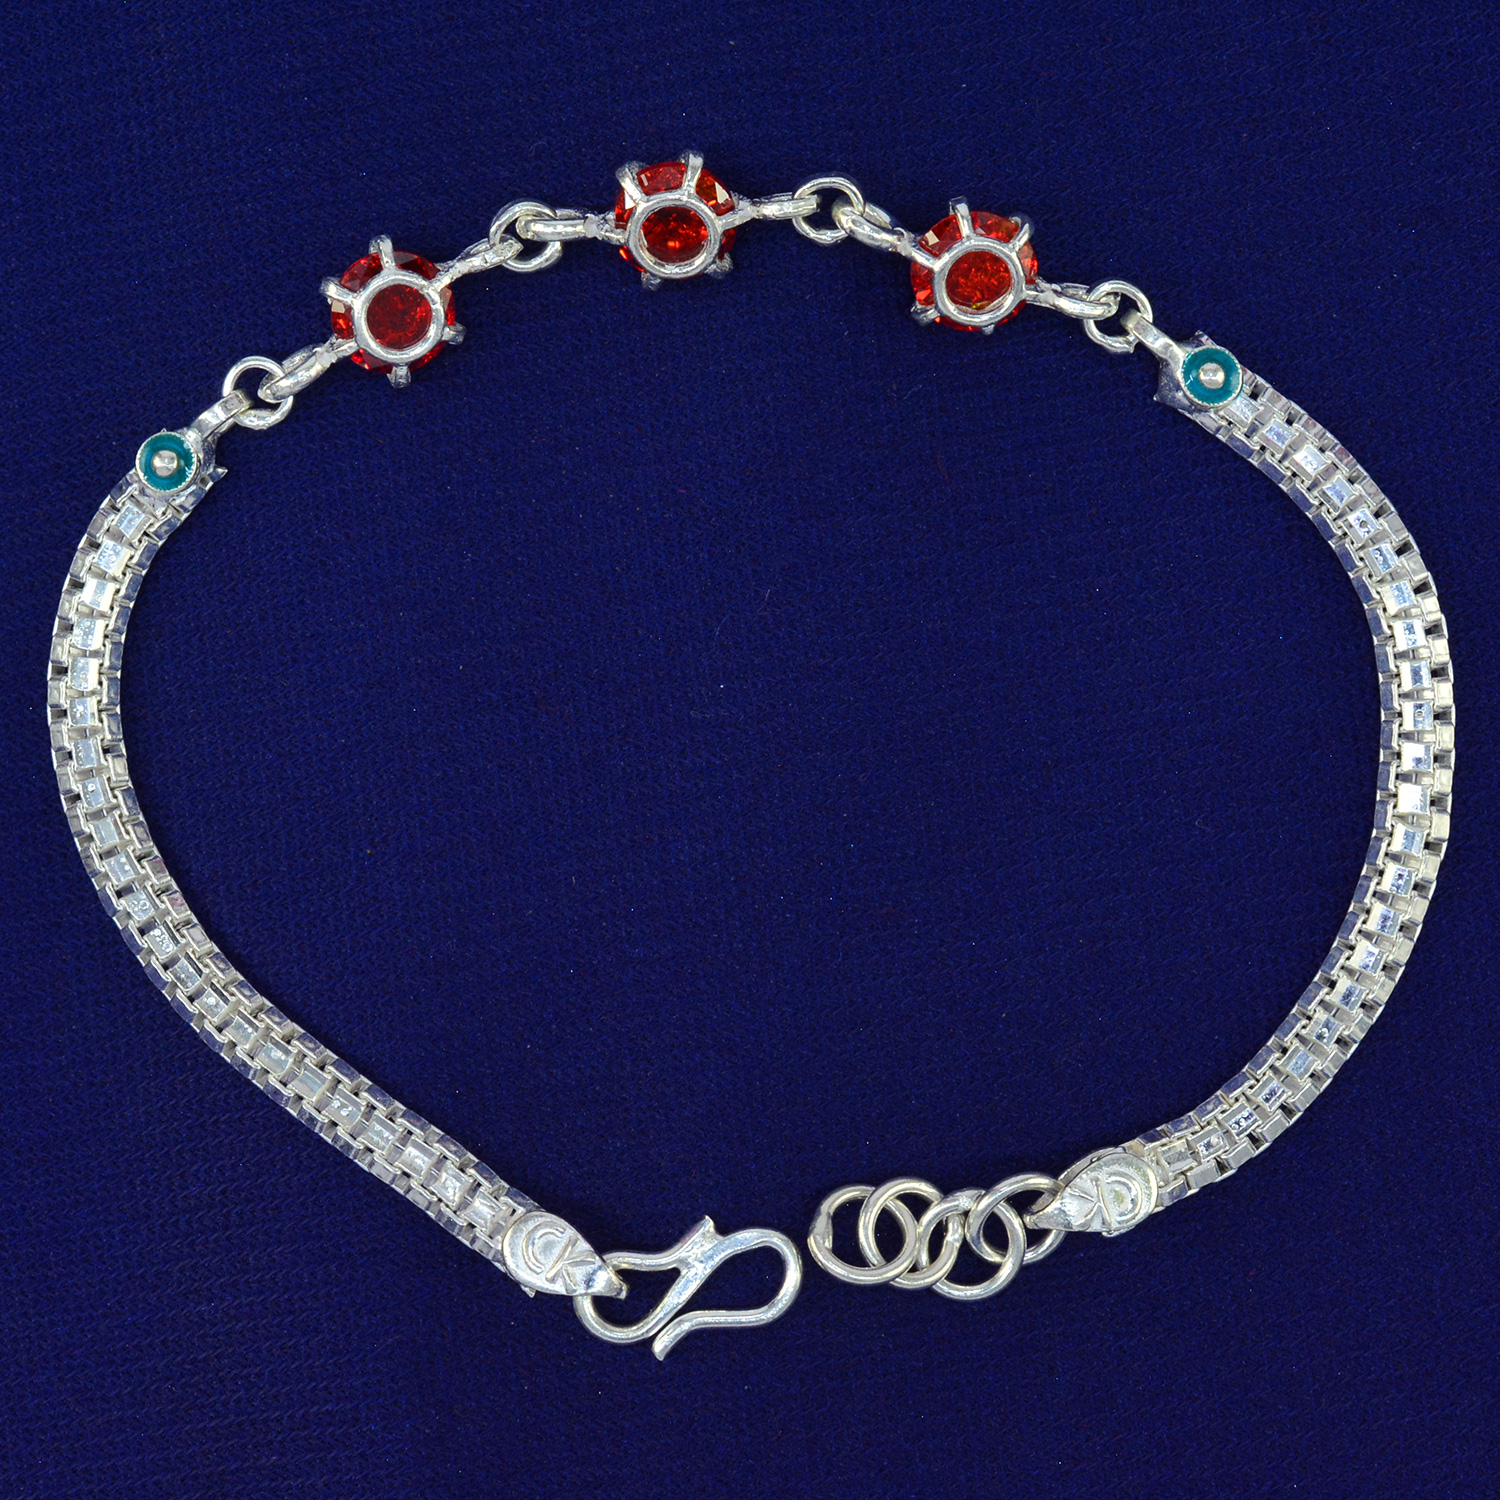 Marvelous Red Beaded 70% Pure Silver Amazing Attractive Rakhi - 10.7 Grams